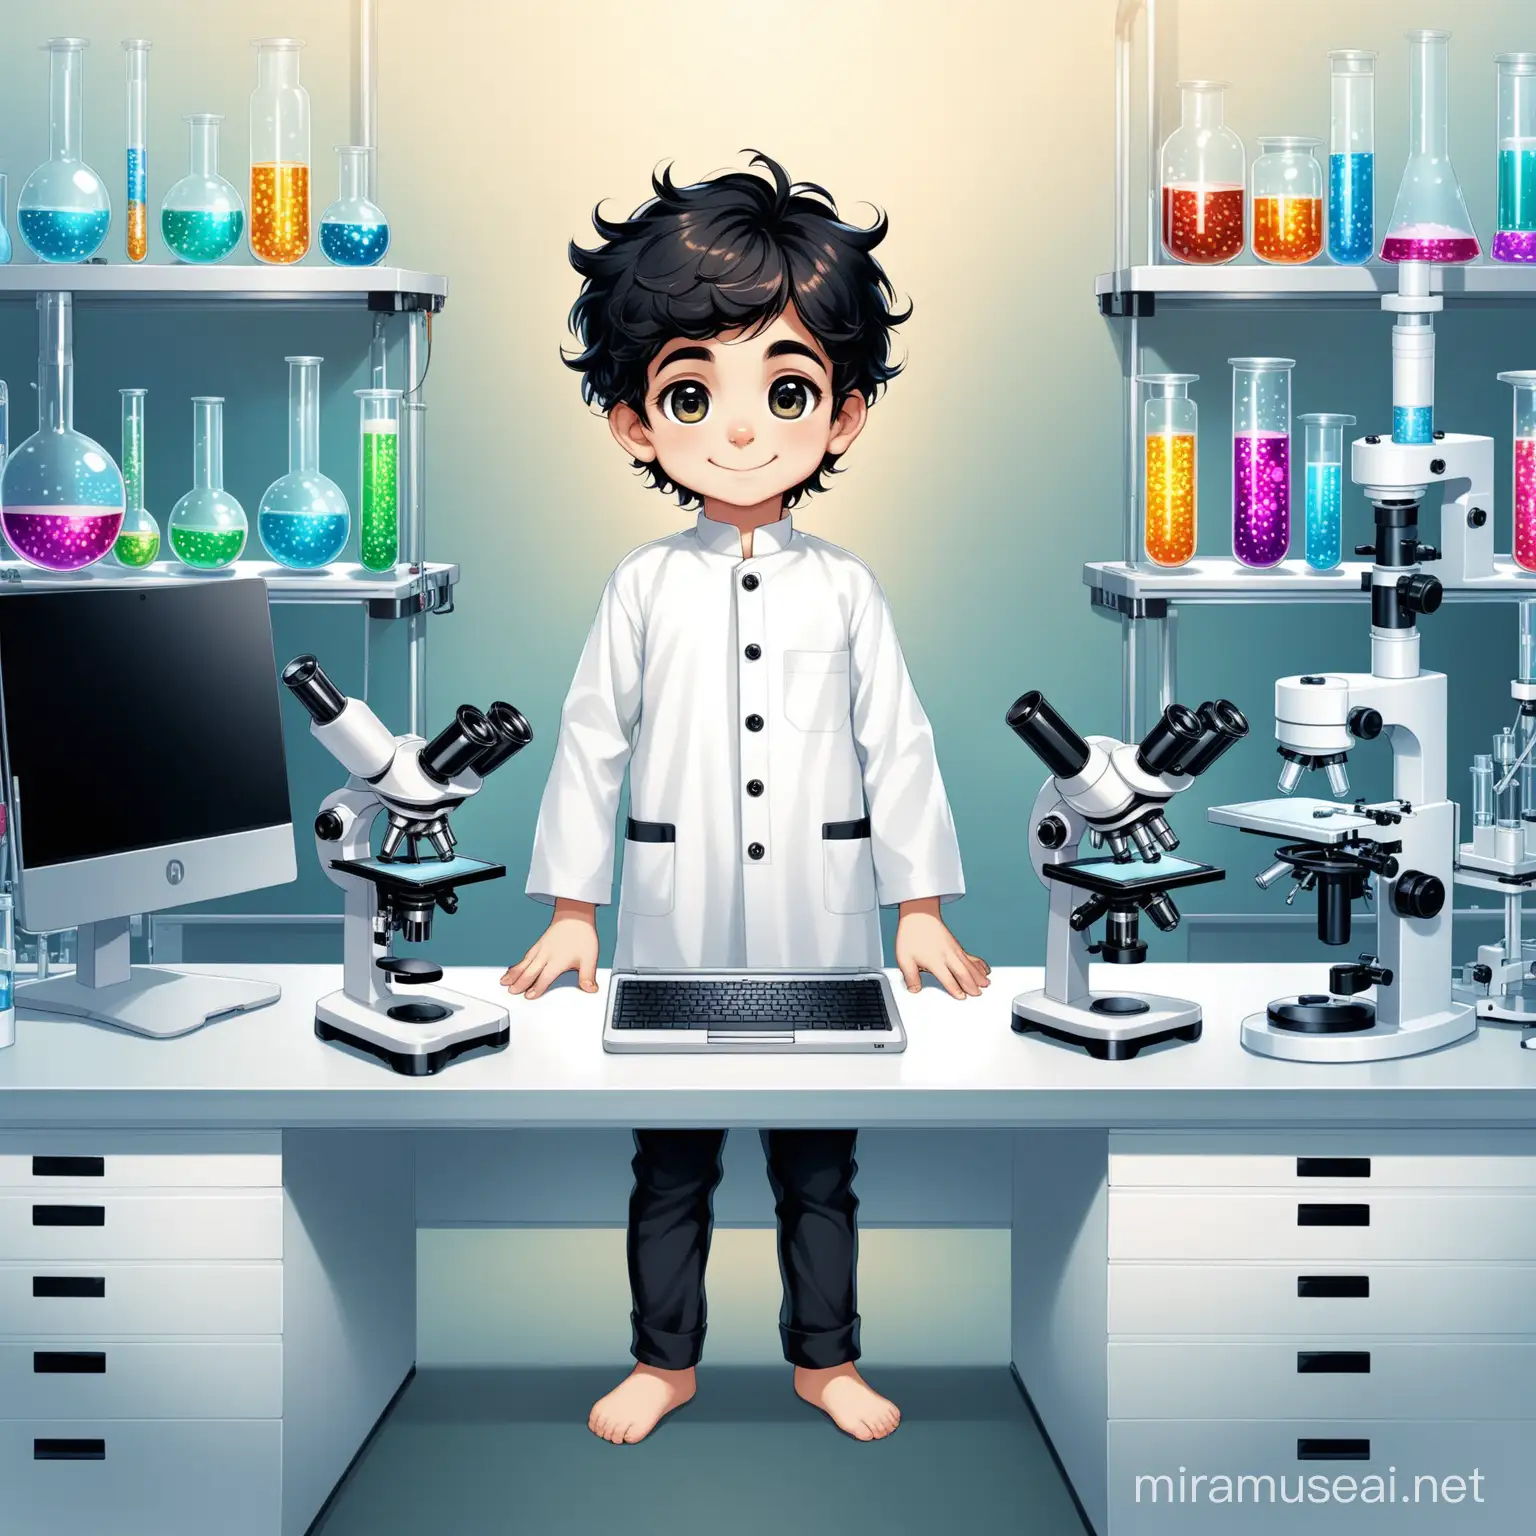 Persian little boy(full height, white skin, cute, bigger nose, smaller eyes, black eyes, smiling, clothes full of many Persian designs).
Atmosphere a super modern laboratory with laptop and microscope and showing cells.